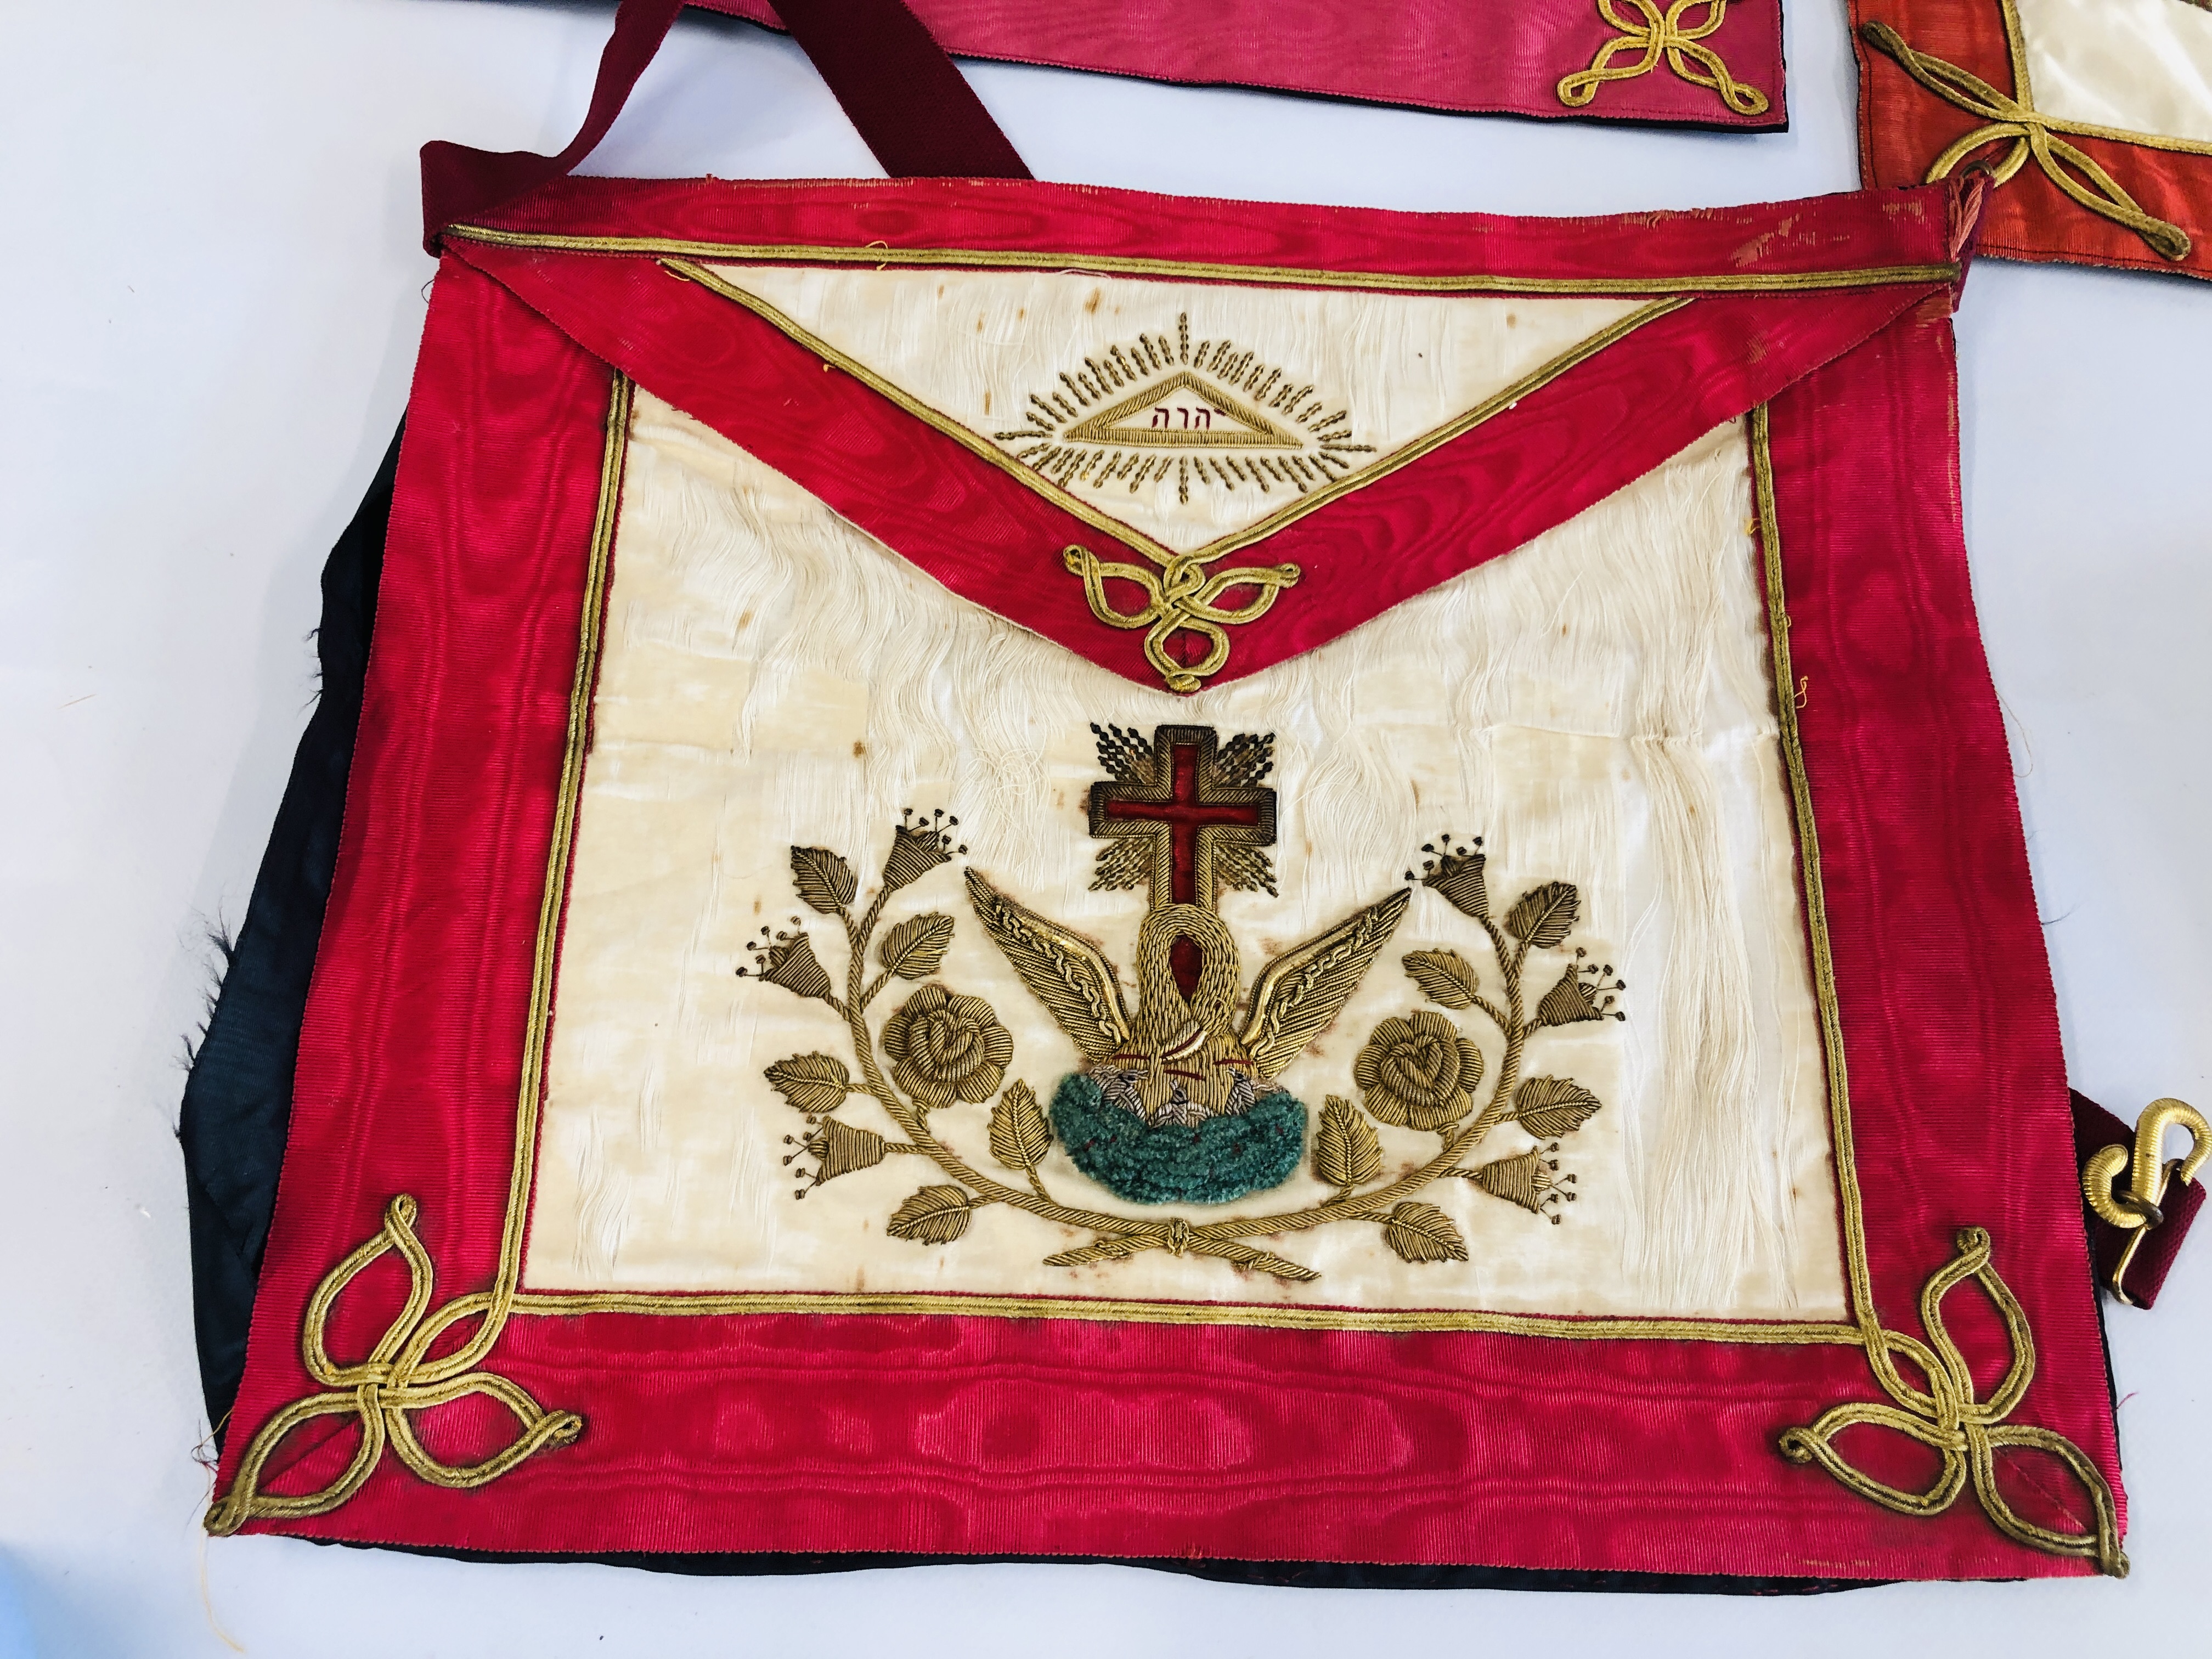 A GROUP OF 8 ELABORATE VINTAGE MASONIC APRONS. - Image 6 of 9